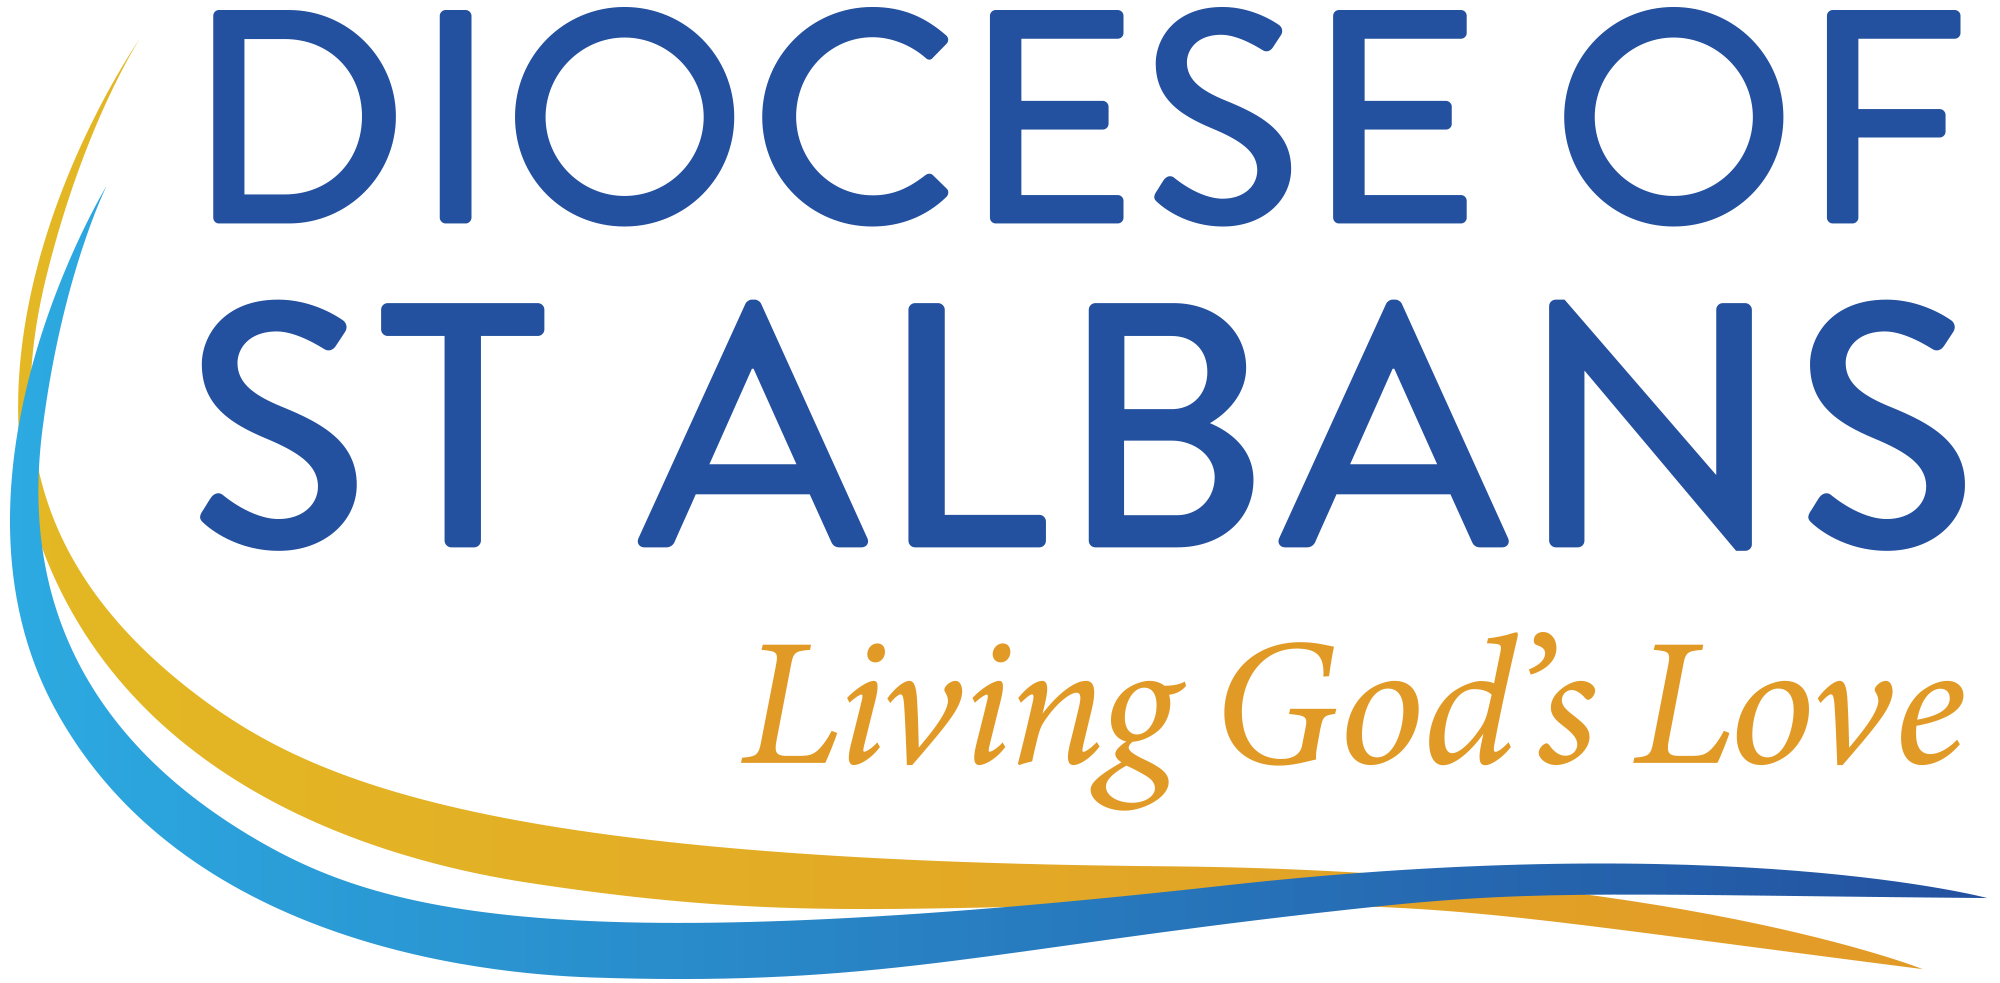 The Diocese of St Albans logo